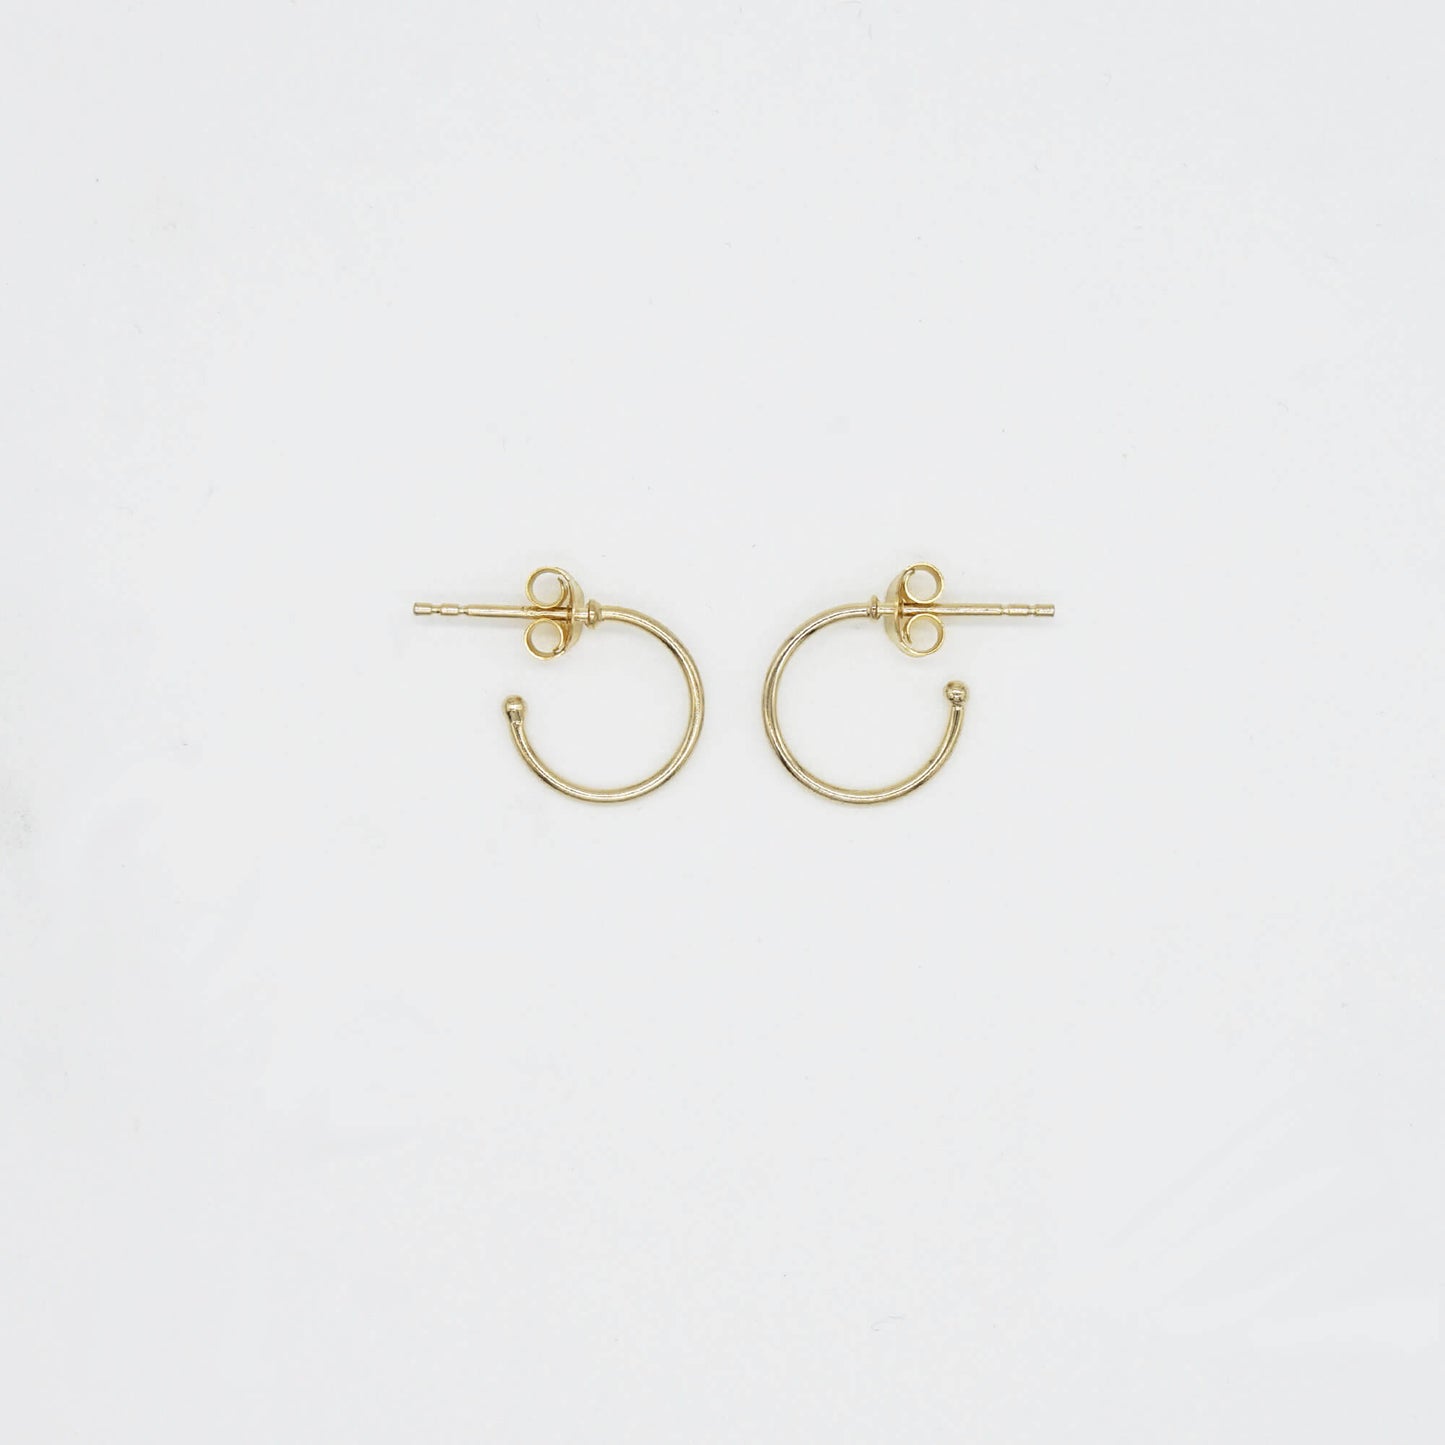 PAIR OF FINE OPEN HOOP EARRINGS WITH POST BACK IN REAL GOLD PLATE OVER STERLING SILVER.